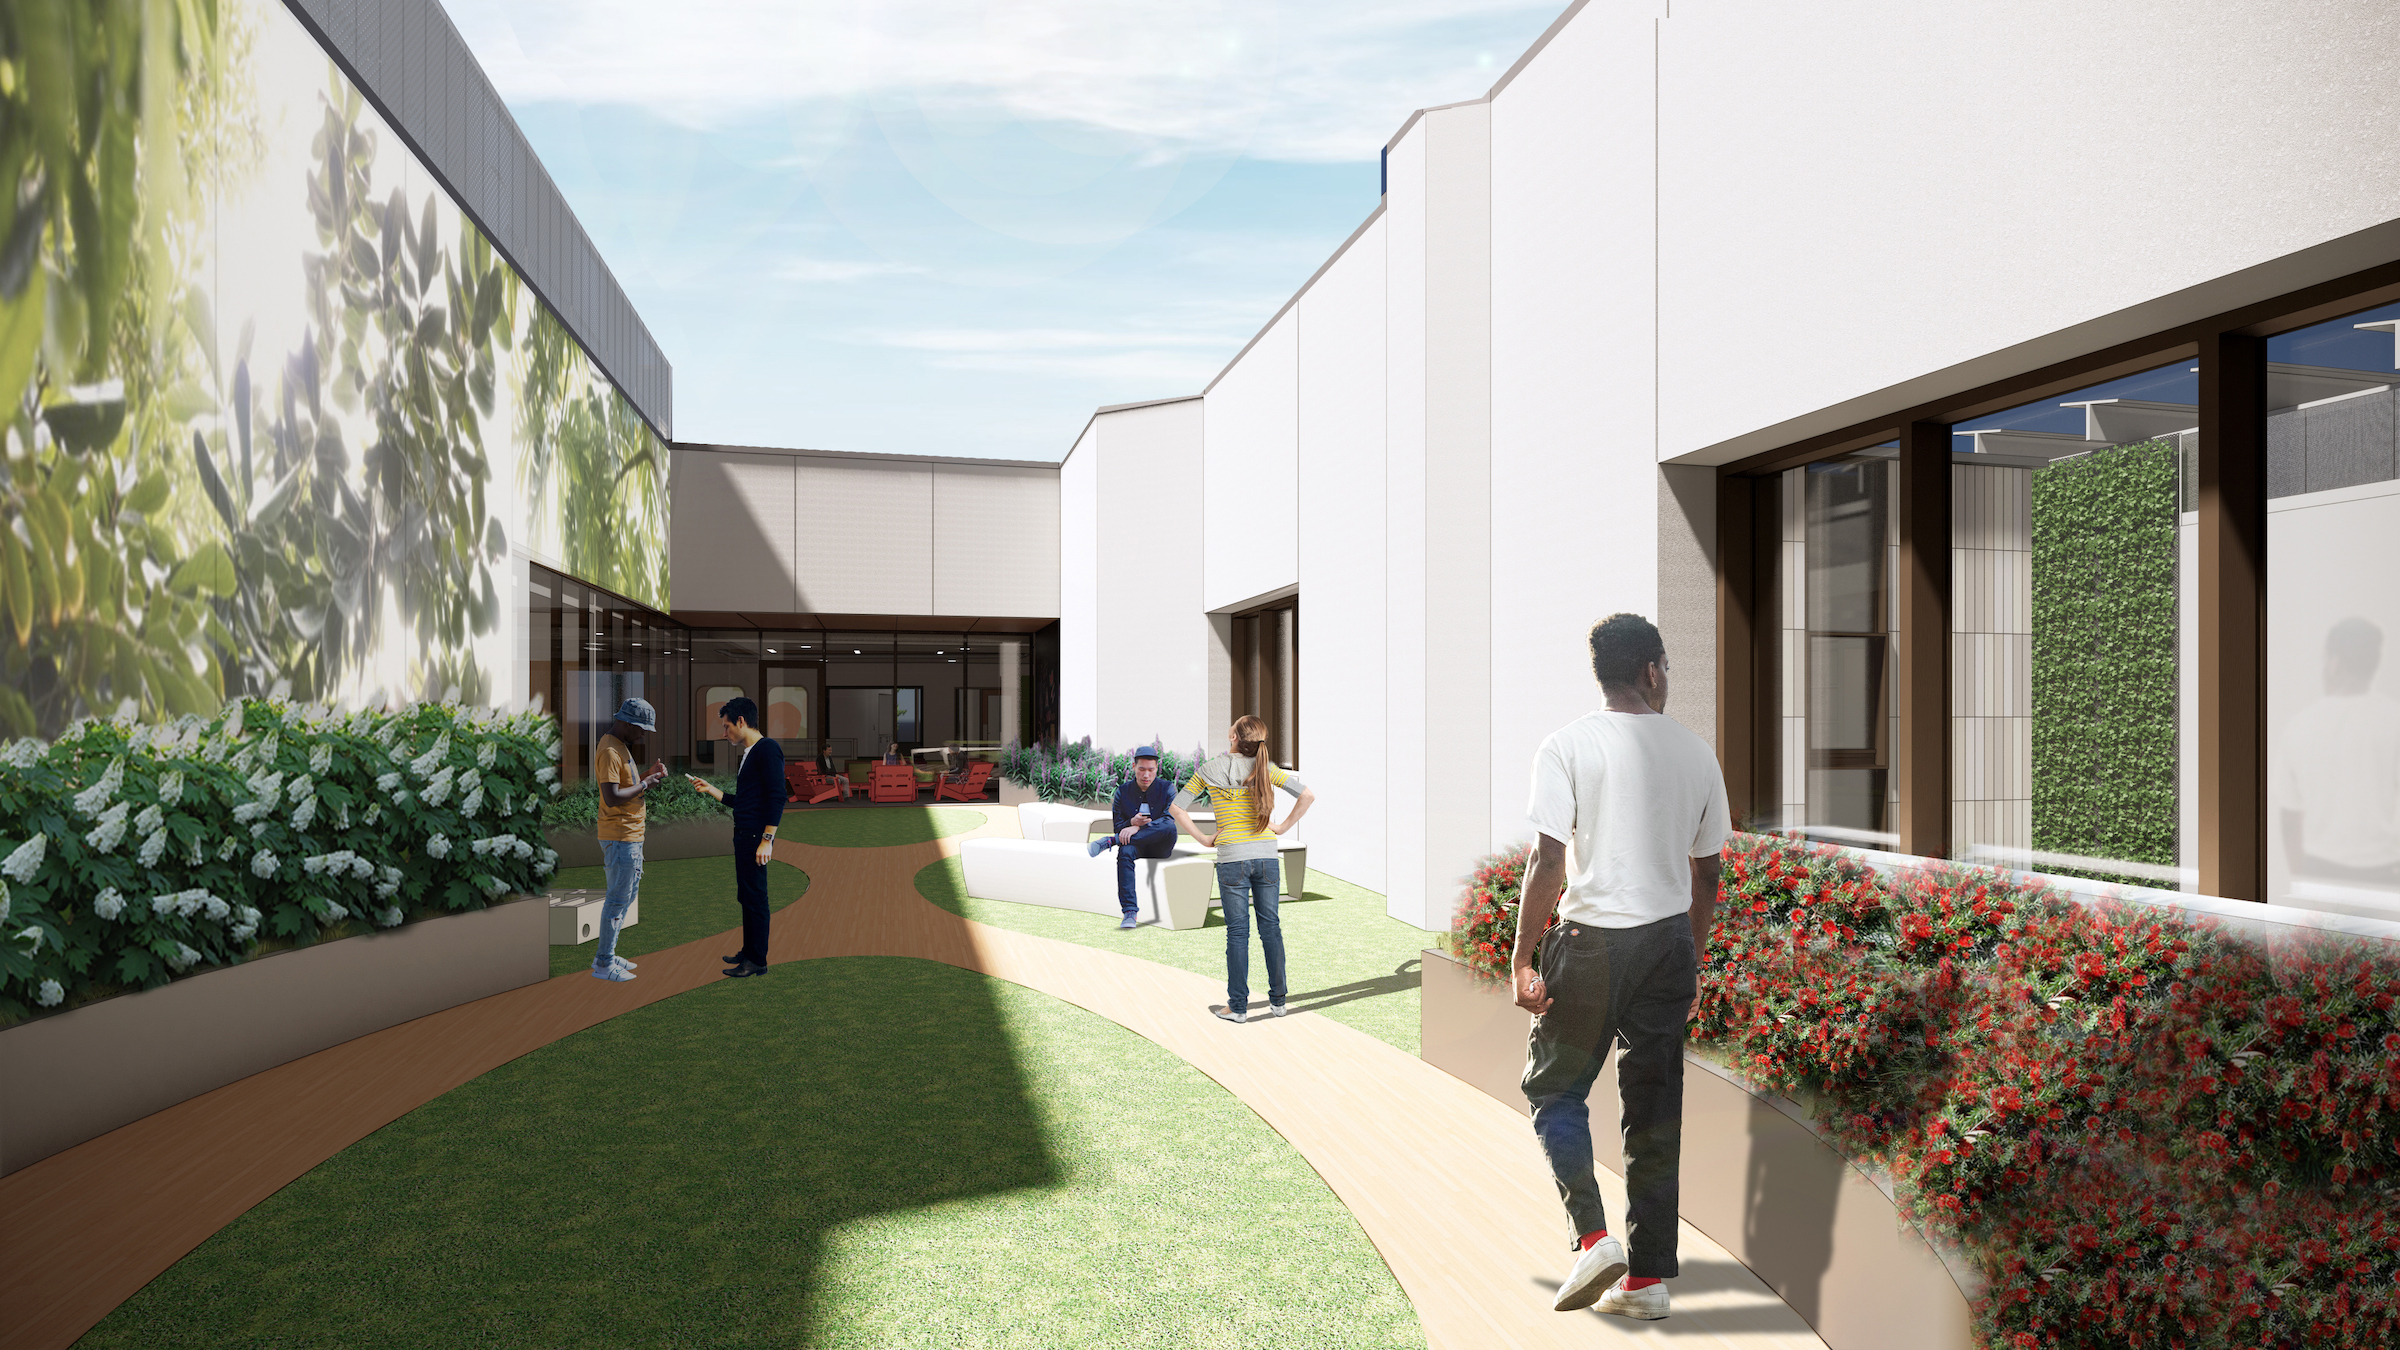 Santa Clara Valley Medical Center breaks ground on a behavioral health facility for both adults and children. Rendering courtesy HGA